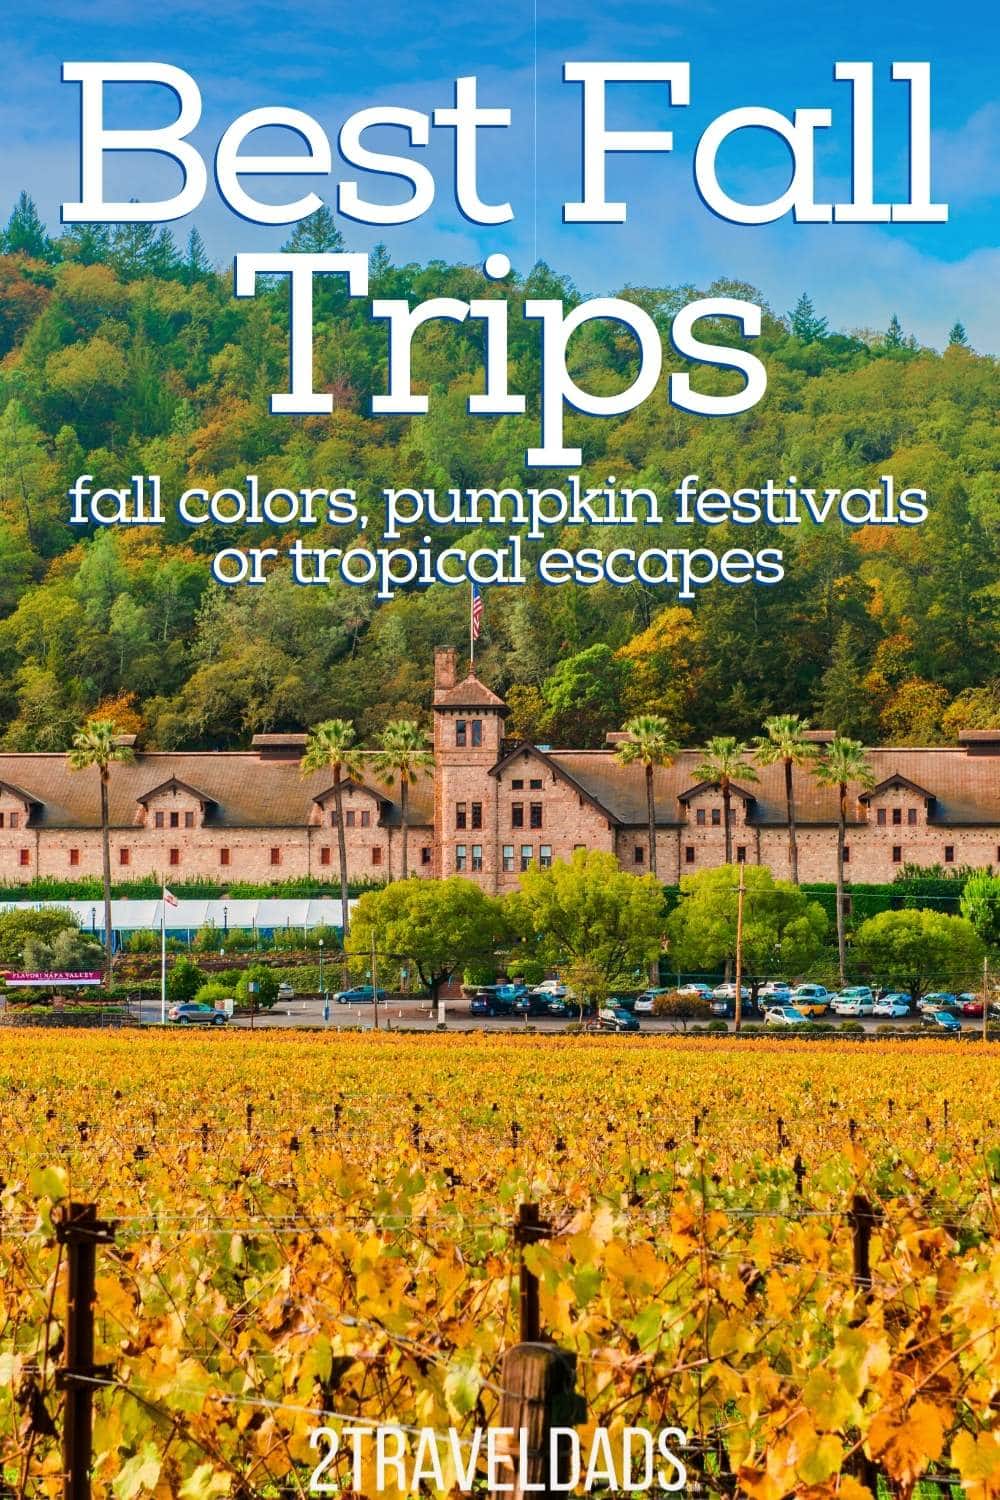 The best places for fall colors in the USA, from the Lakes Region of New Hampshire to Napa Valley. 15+ picks for easy weekend getaways for autumn foliage across the United States.